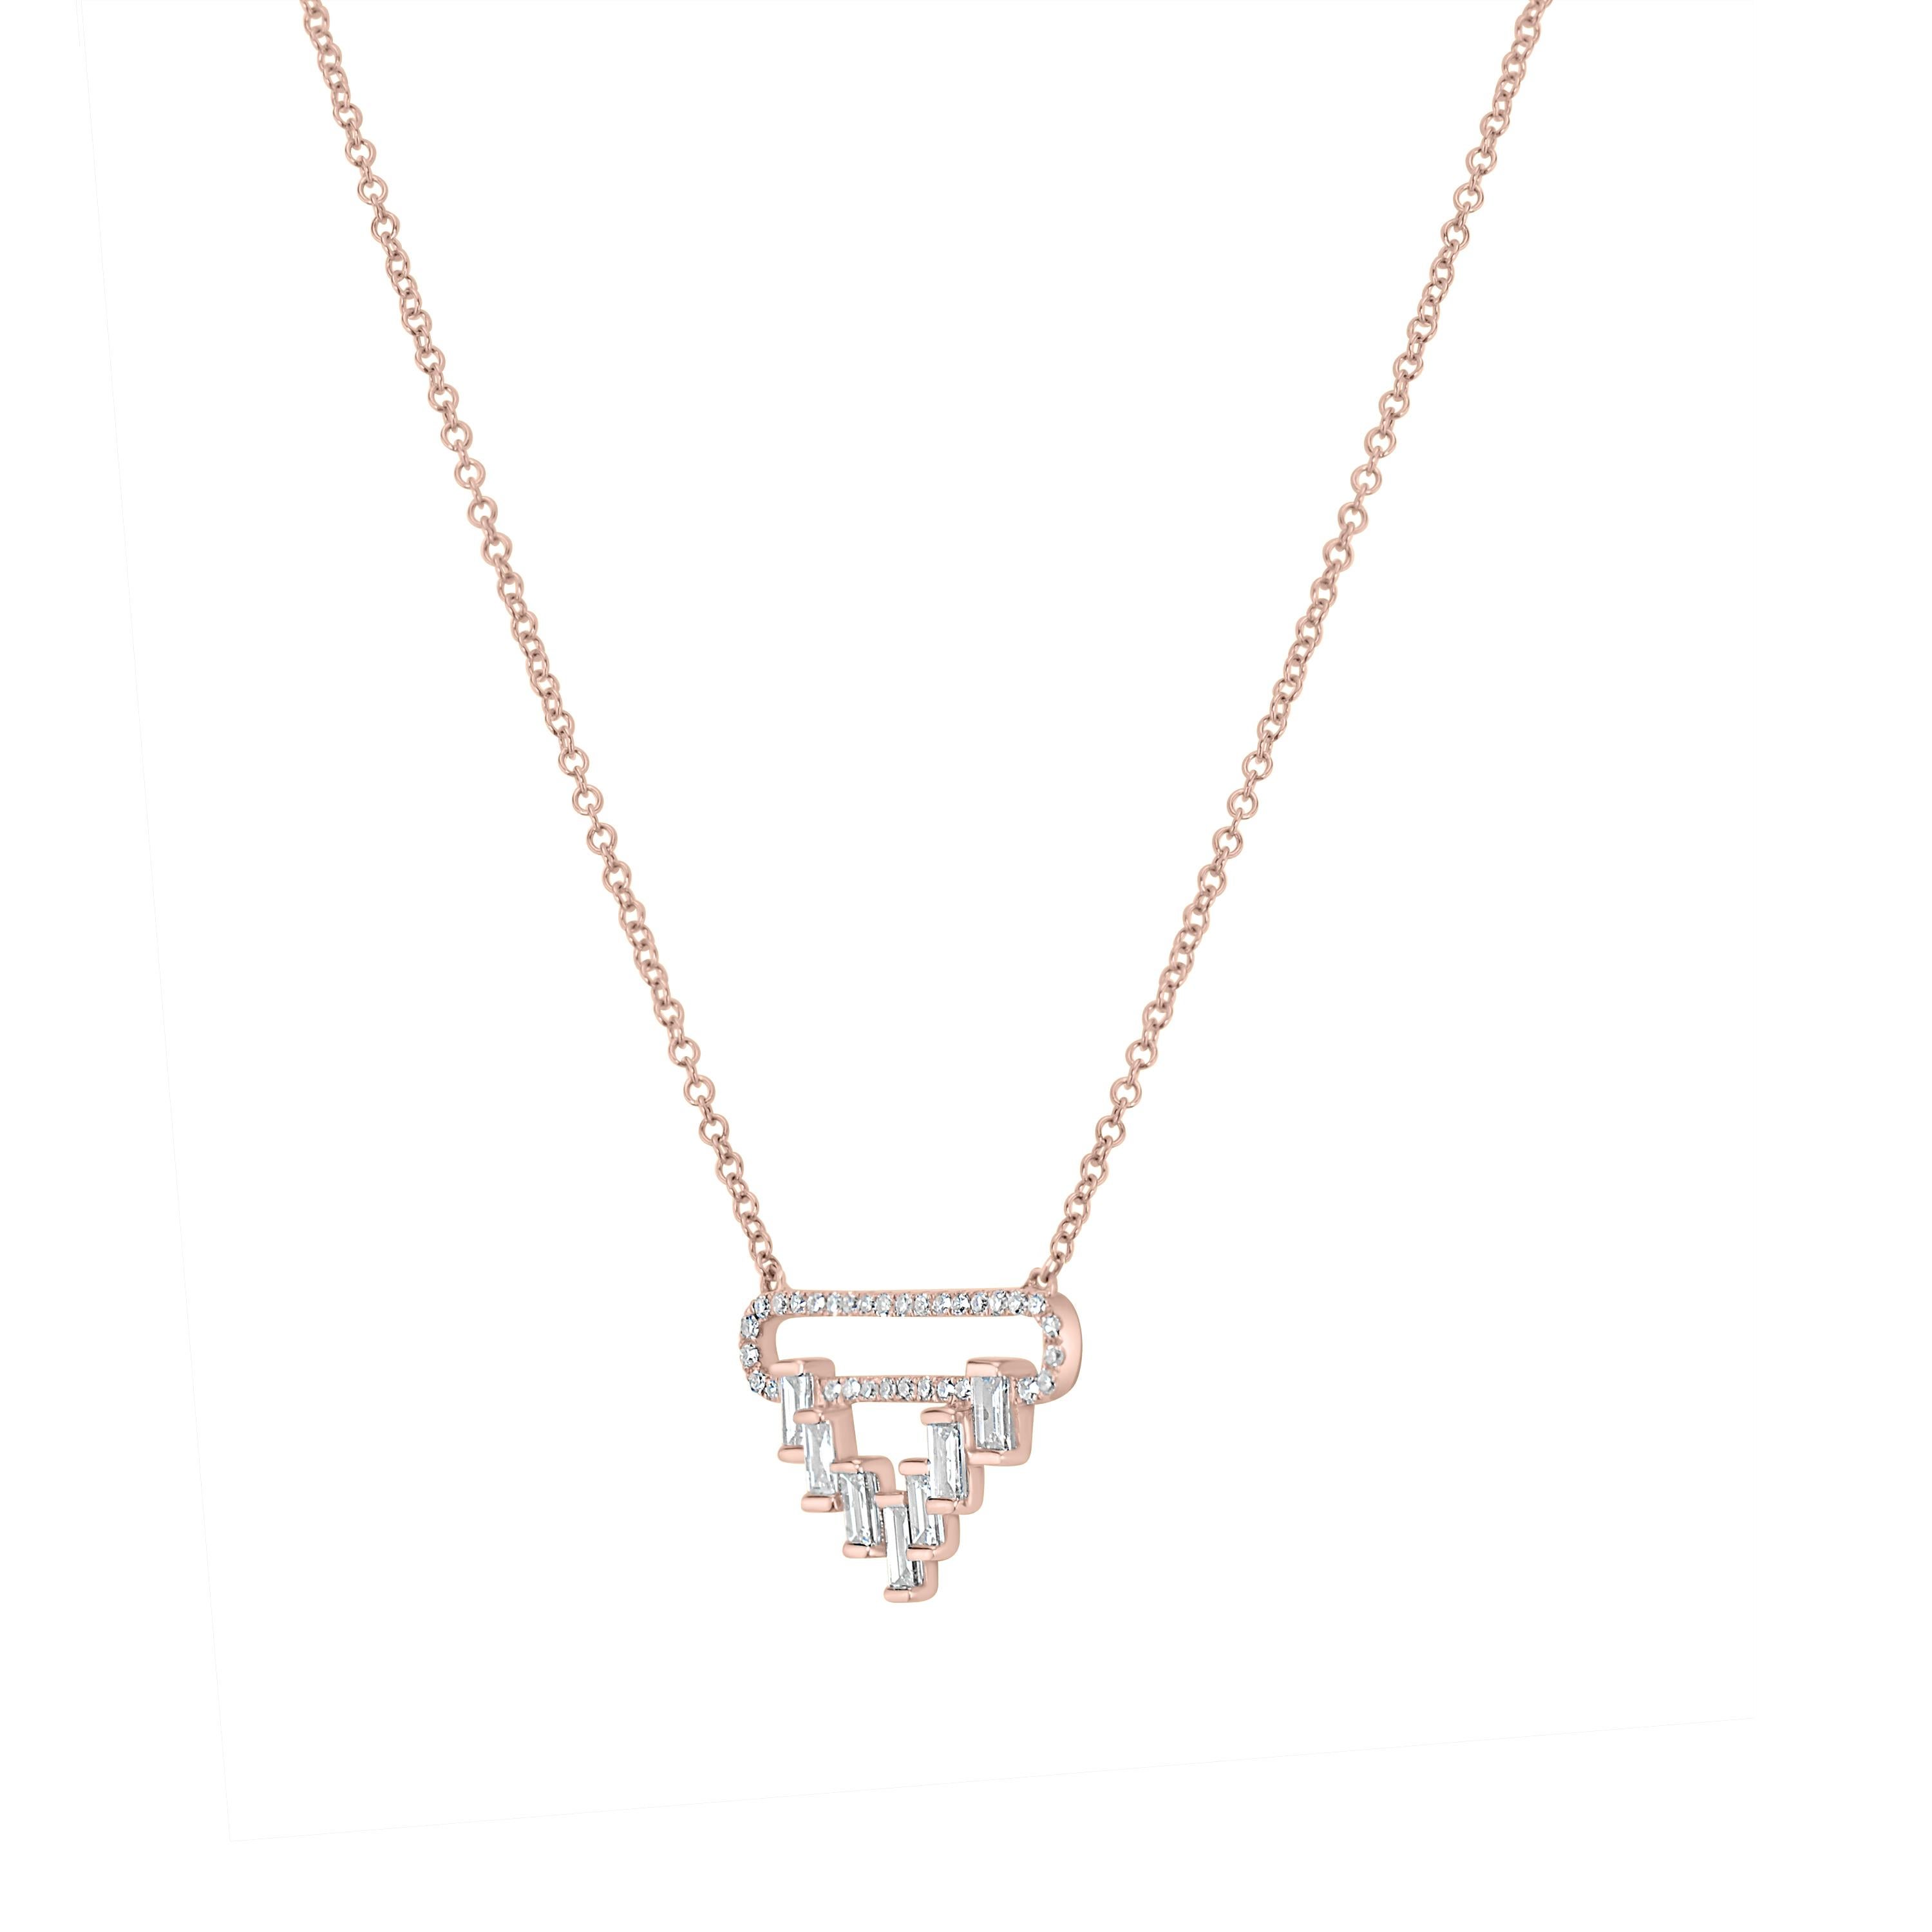 This Luxle elegant 15 inch Round and Baguette Diamond Pendant Necklace rendered in gleaming 14K rose gold compliments your neckline. Embellished with 32 round diamonds and 7 baguette diamonds totaling 0.51Ct arranged in an open space triangular